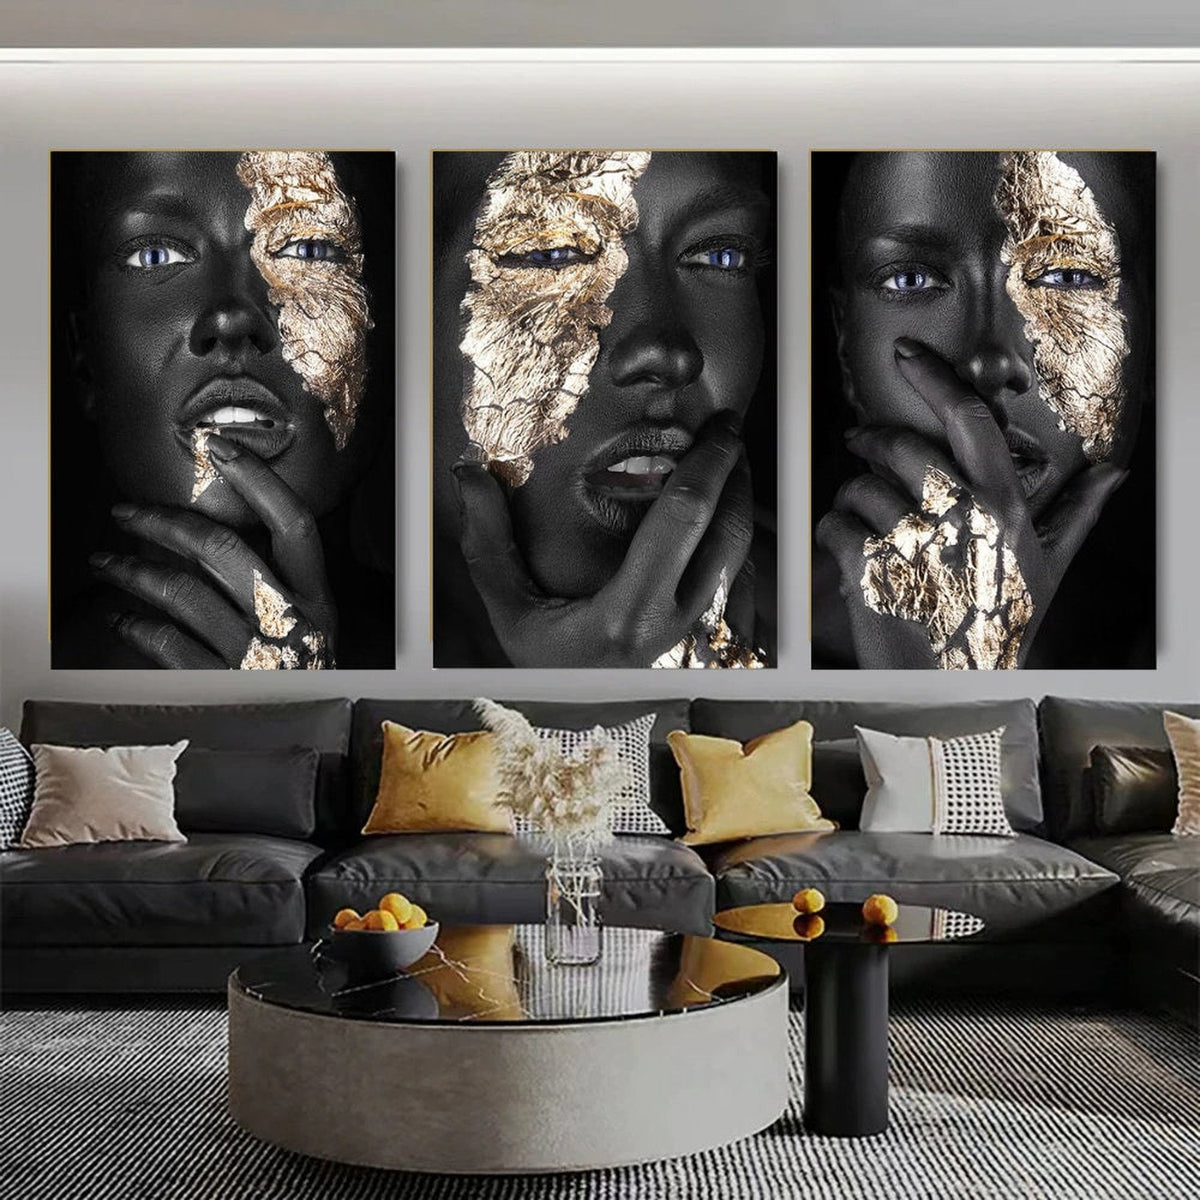 Black Woman Wall Art: Expressive and Empowering Pieces